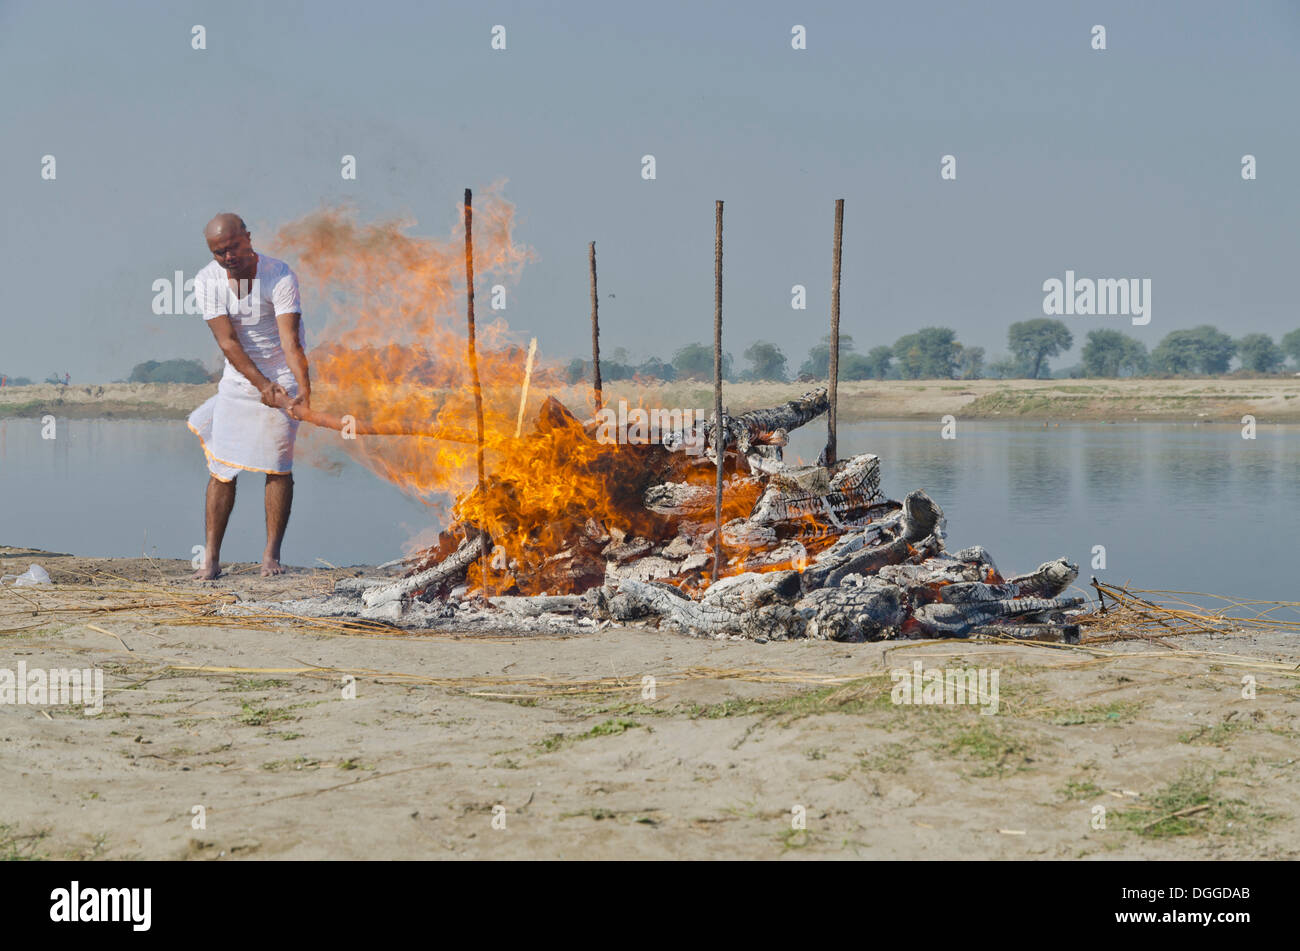 The eldest son maintaining the fire as part of a cremation ceremony, Vrindavan, India, Asia Stock Photo